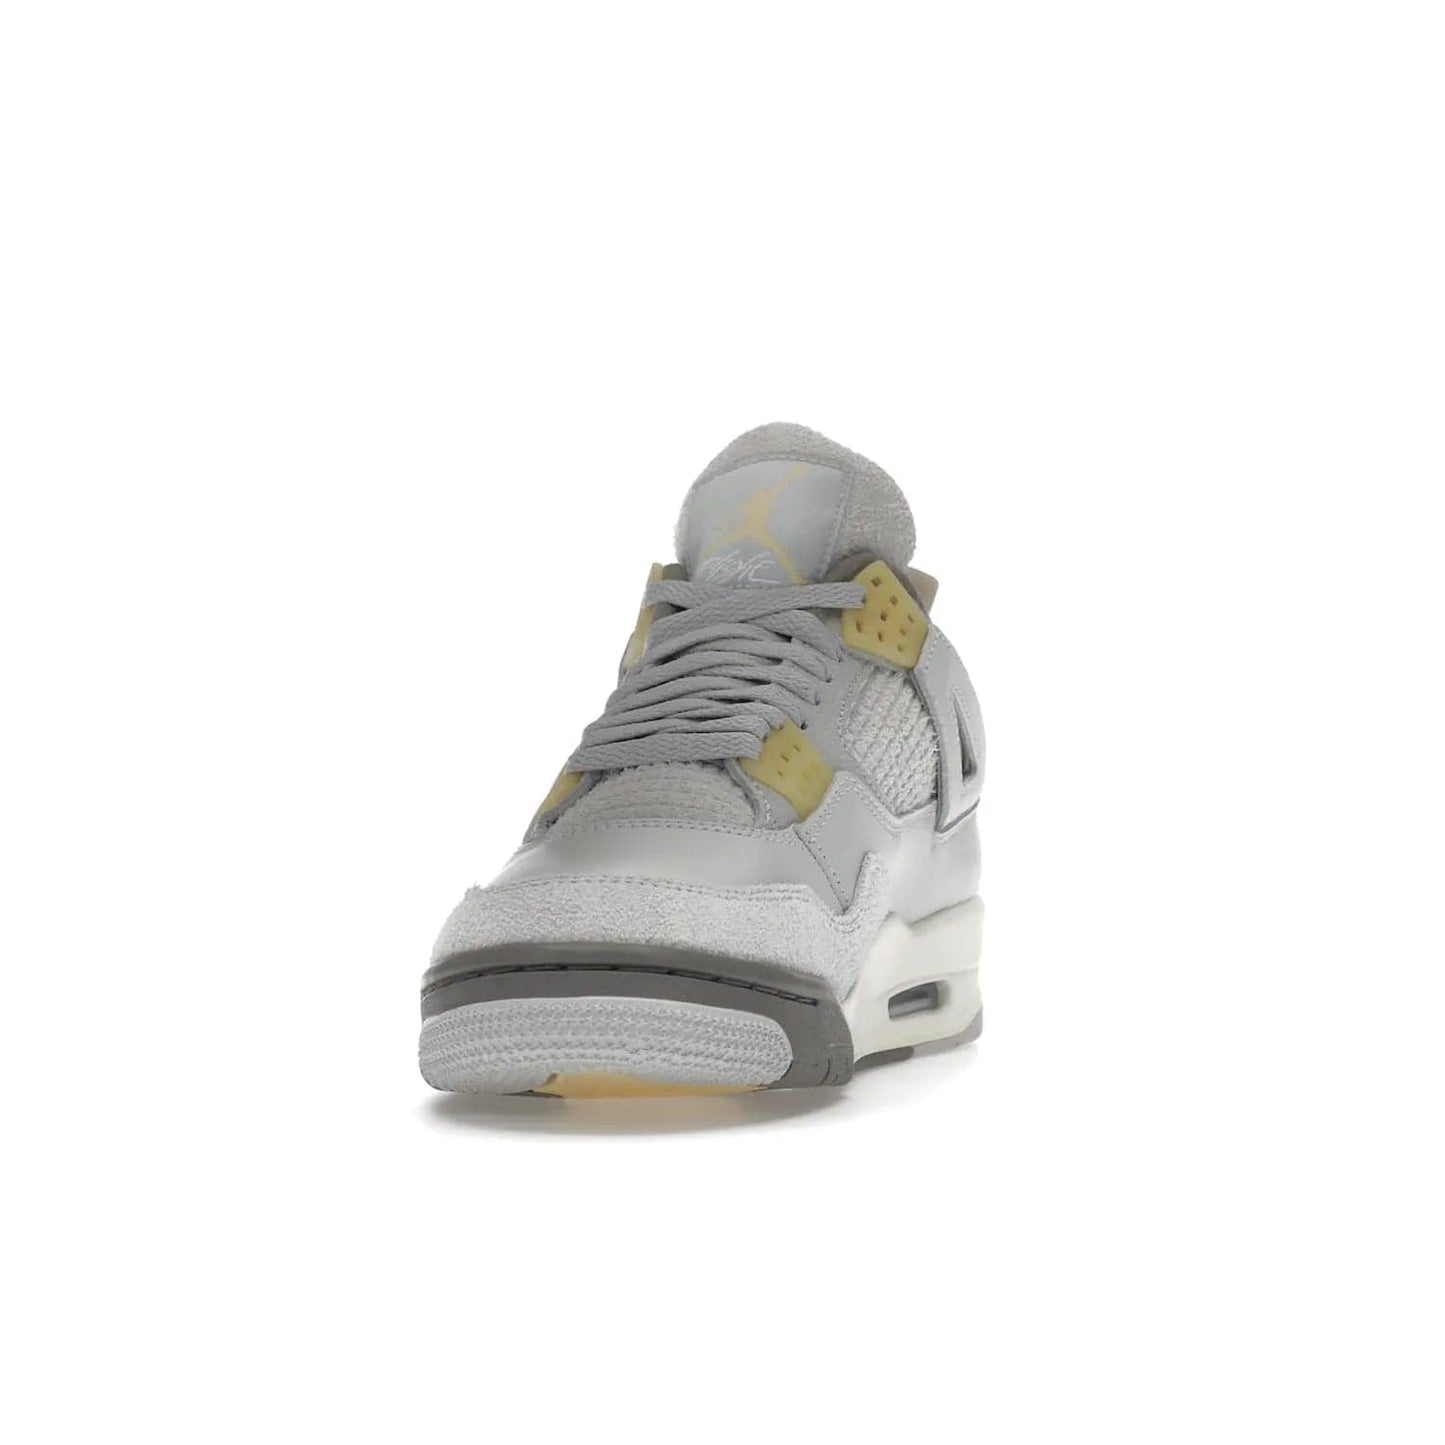 Jordan 4 Retro SE Craft Photon Dust - Image 12 - Only at www.BallersClubKickz.com - Upgrade your shoe collection with the Air Jordan 4 Retro SE Craft Photon Dust. This luxurious sneaker features a combination of suede and leather with unique grey tones like Photon Dust, Pale Vanilla, Off White, Grey Fog, Flat Pewter, and Sail. Available February 11, 2023.